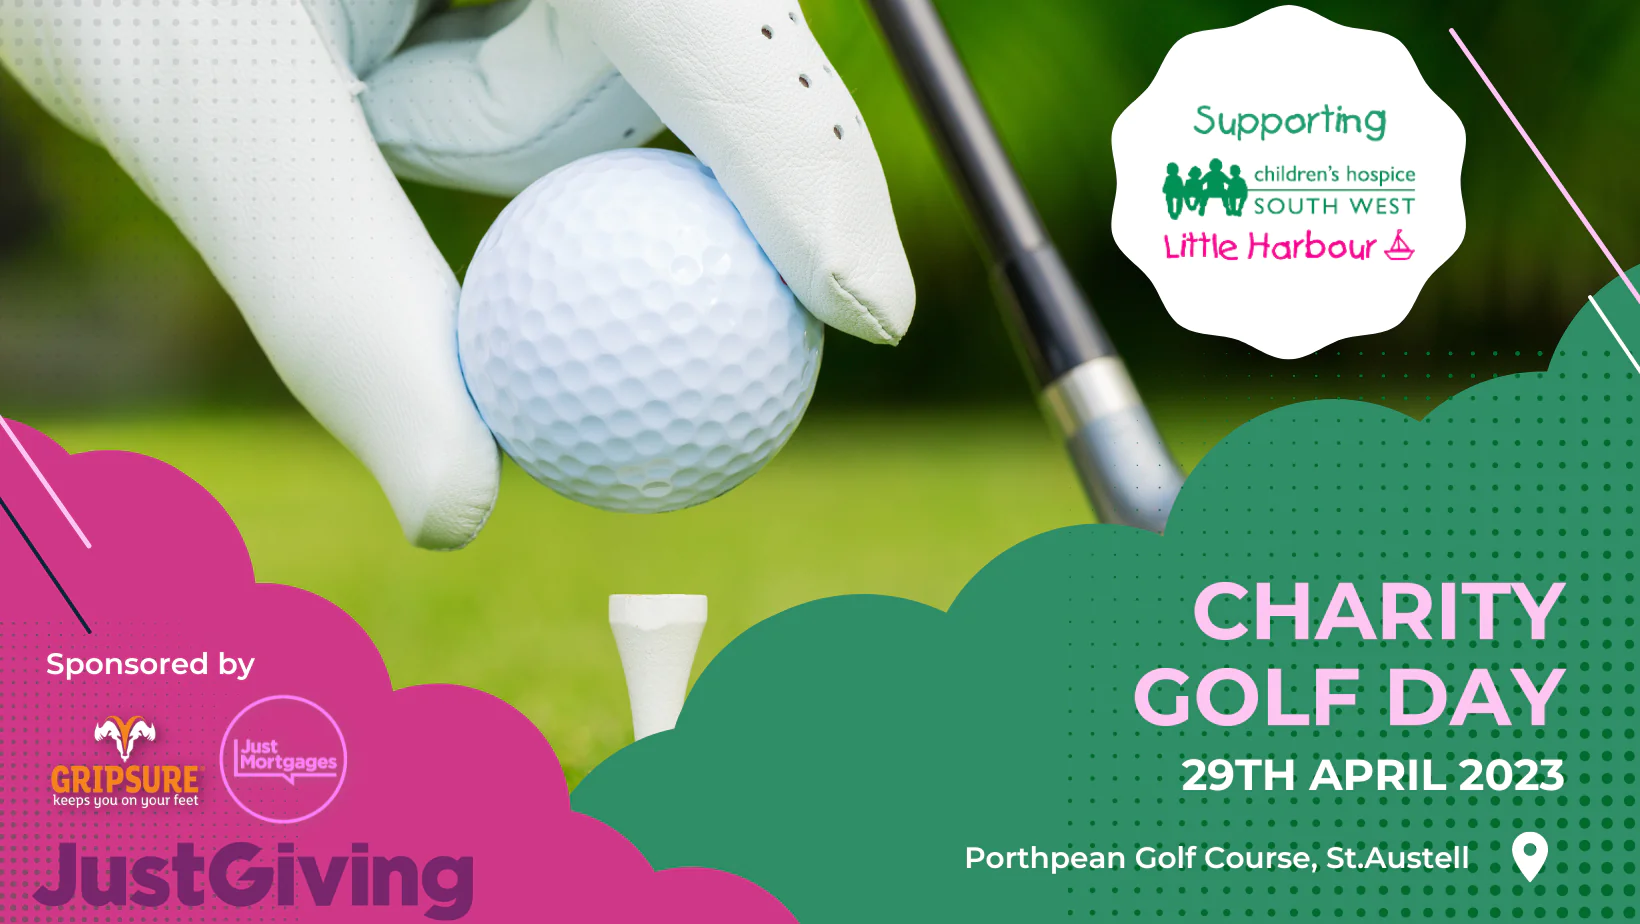 Gripsure hosts charity golf day